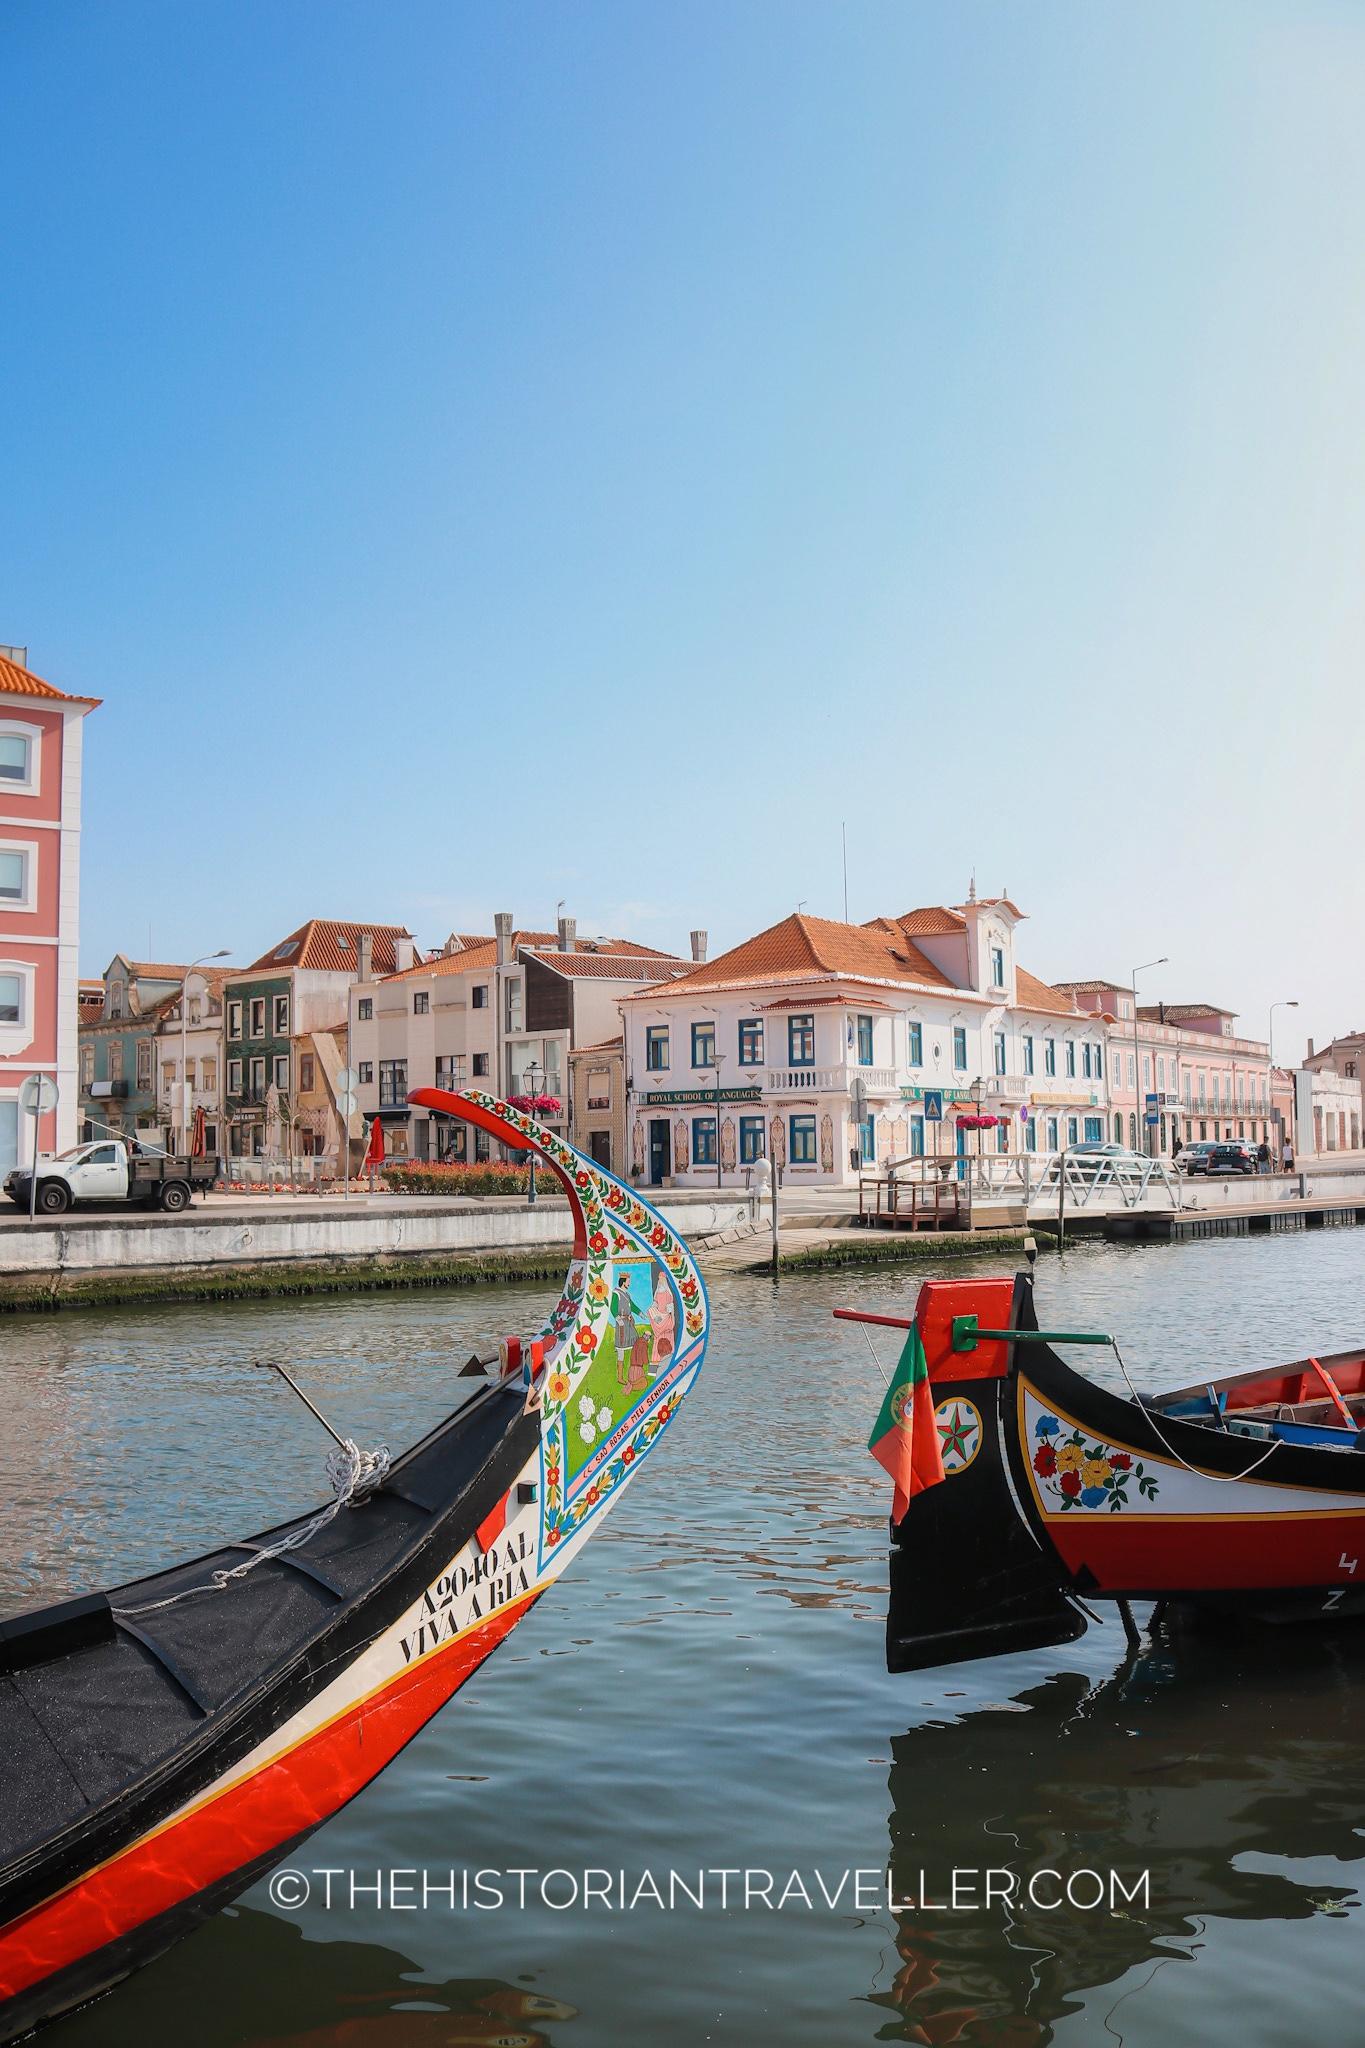 View of the Moliceiros. Traditional Aveiro boats